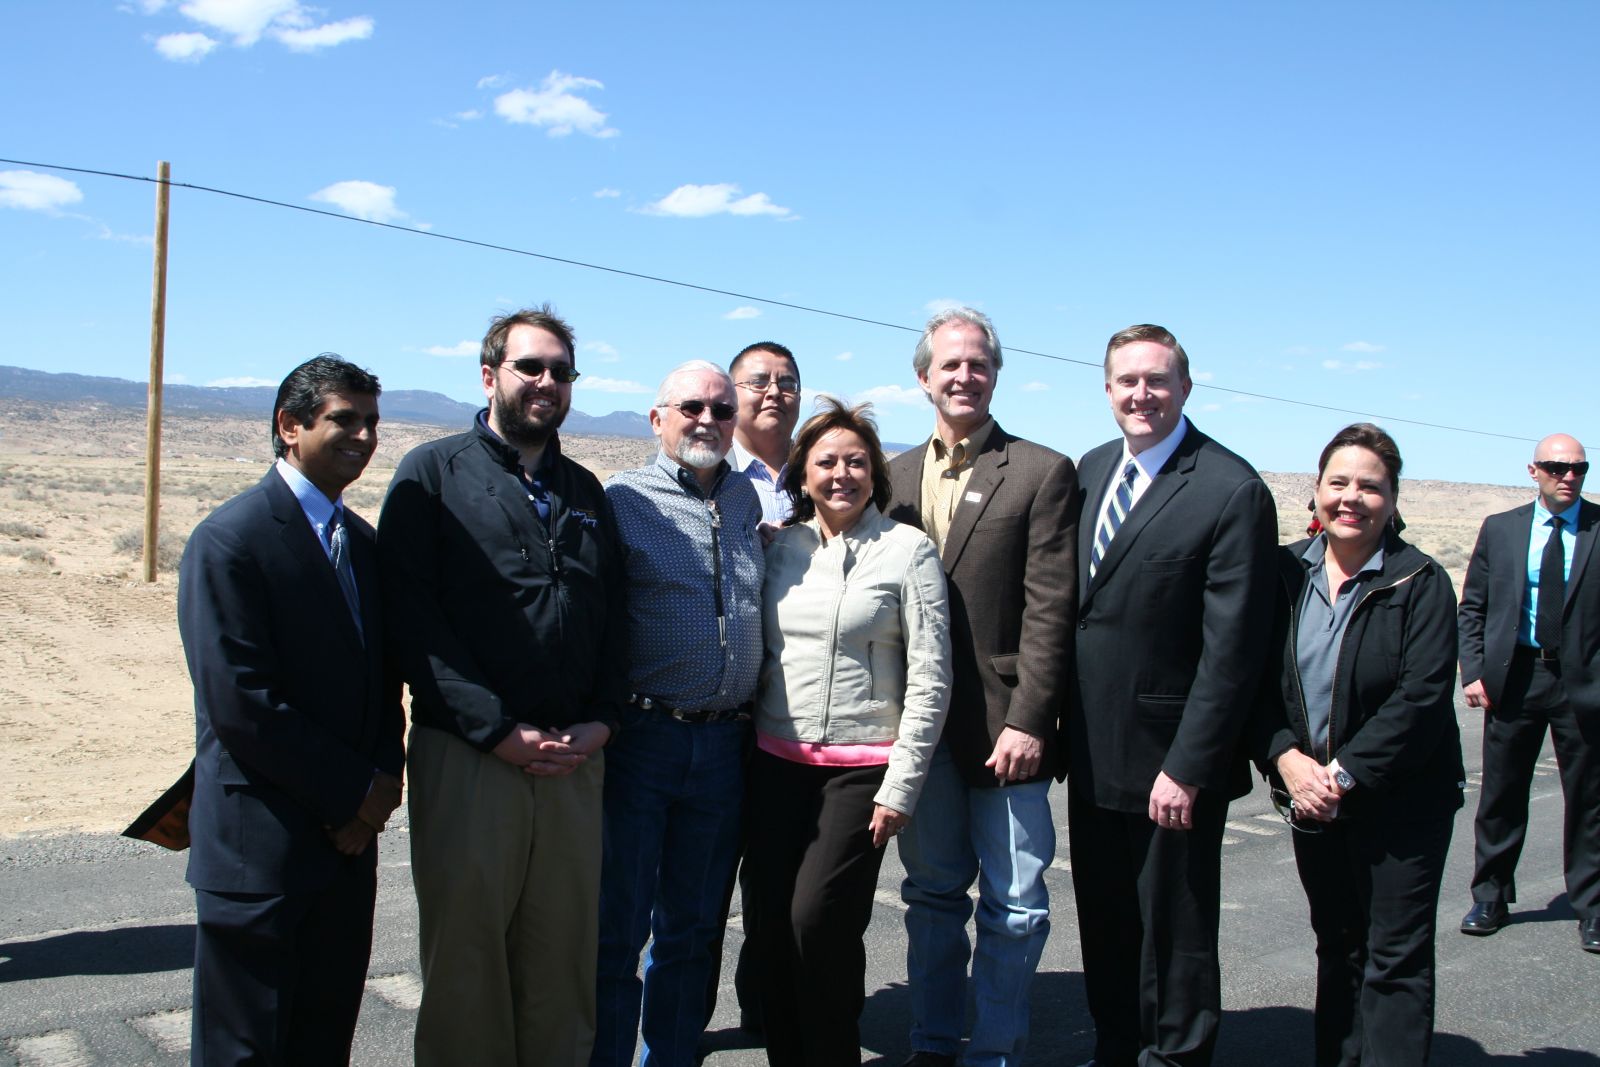 $78M to complete US Hwy 491 culminates successful 9-month effort  by GGEDC and City of Gallup Photo